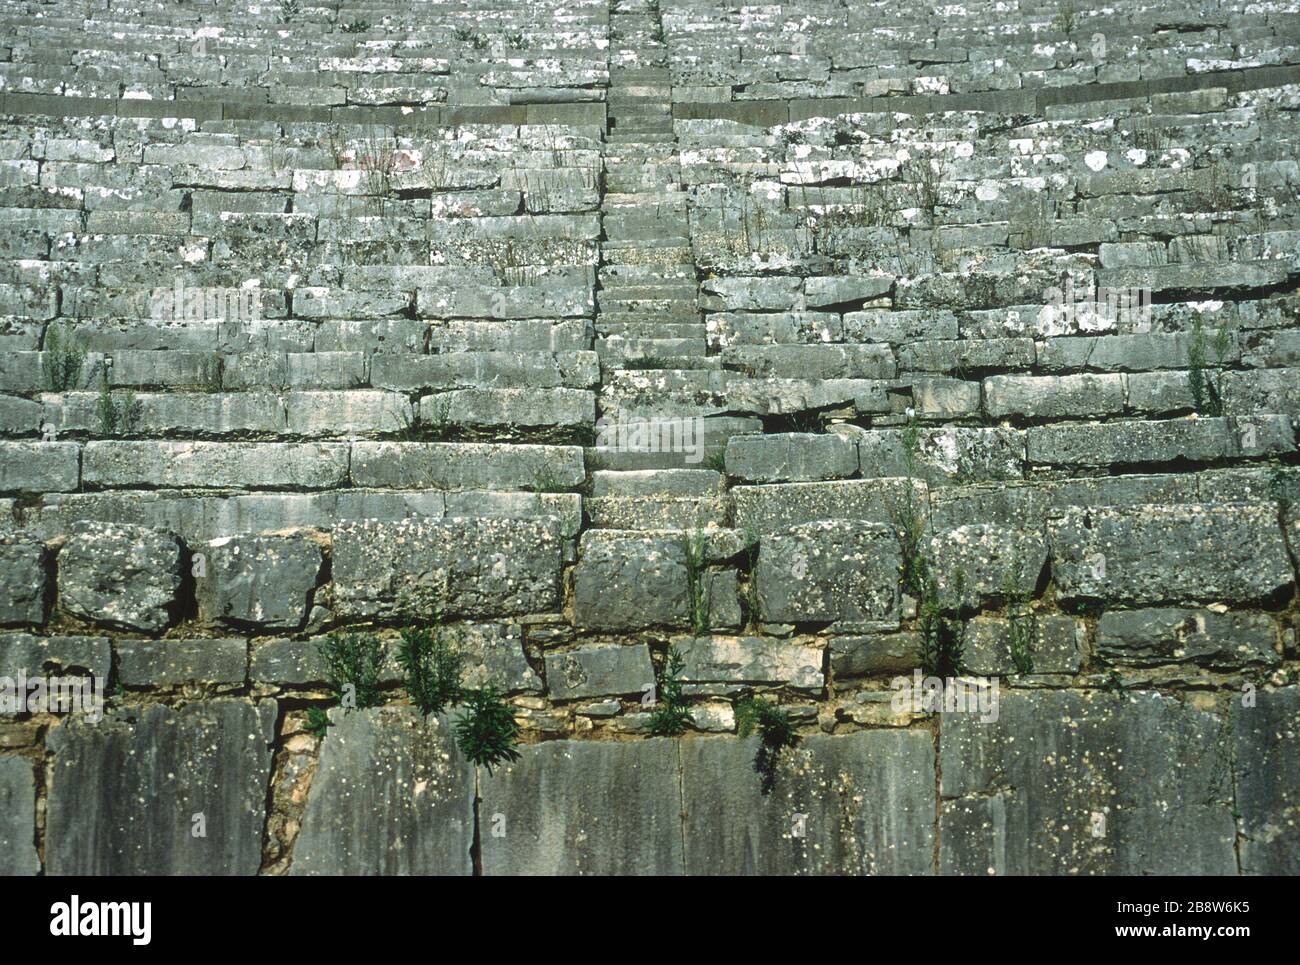 Detail view of the ancient Greek theatre at Dodoni, Ioannina, Epirus, Greece, showing curved rows of stone seats looking down on the stage and steps up to each level. Dodoni is one of 15 Ancient Greek Theatres with tentative status as a UNESCO World Heritage Site. Stock Photo